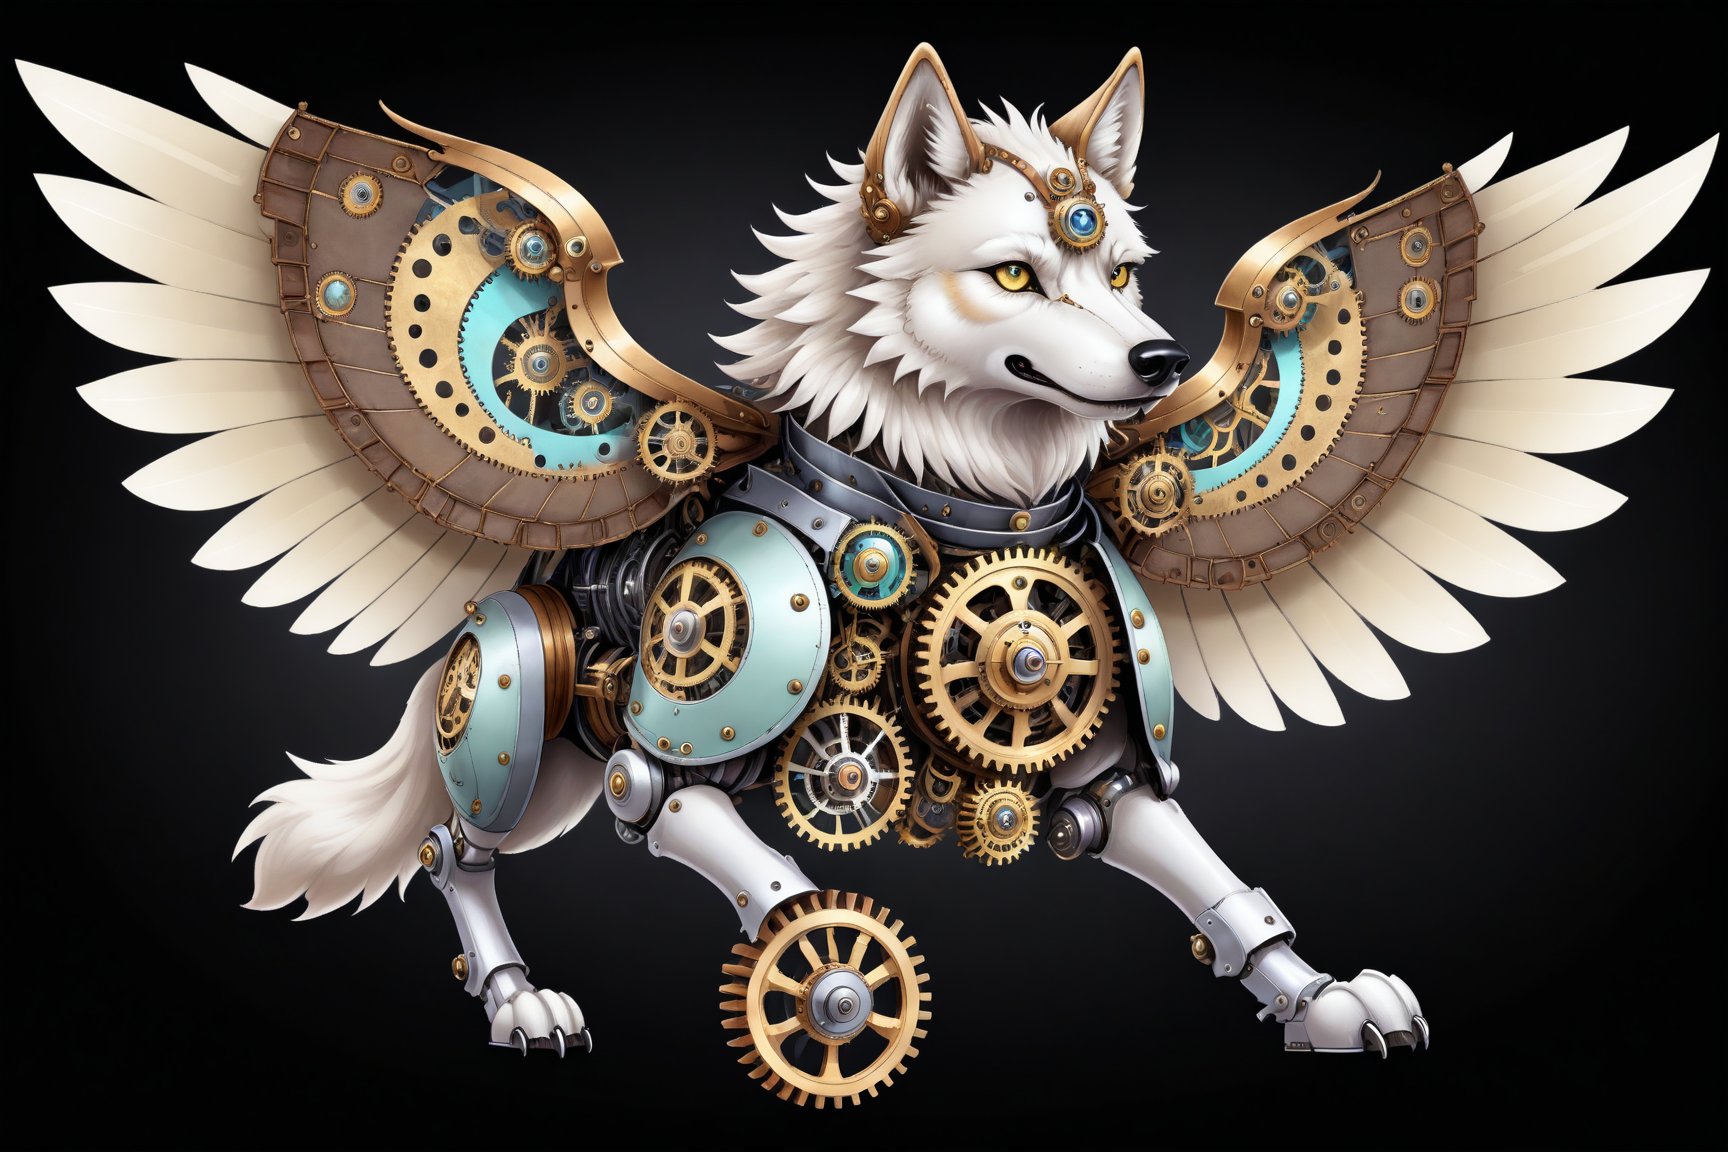 Generates a detailed steampunk style image with pastel colors and golden brown of a wolf with wing seen from above. The beetle must be adorned with intricate gears and mechanical elements that imitate its natural structure. The image must be high resolution and show a perfect fusion between the organic and the mechanical, black background,DonMSt34mPXL,steampunk,steampunk style